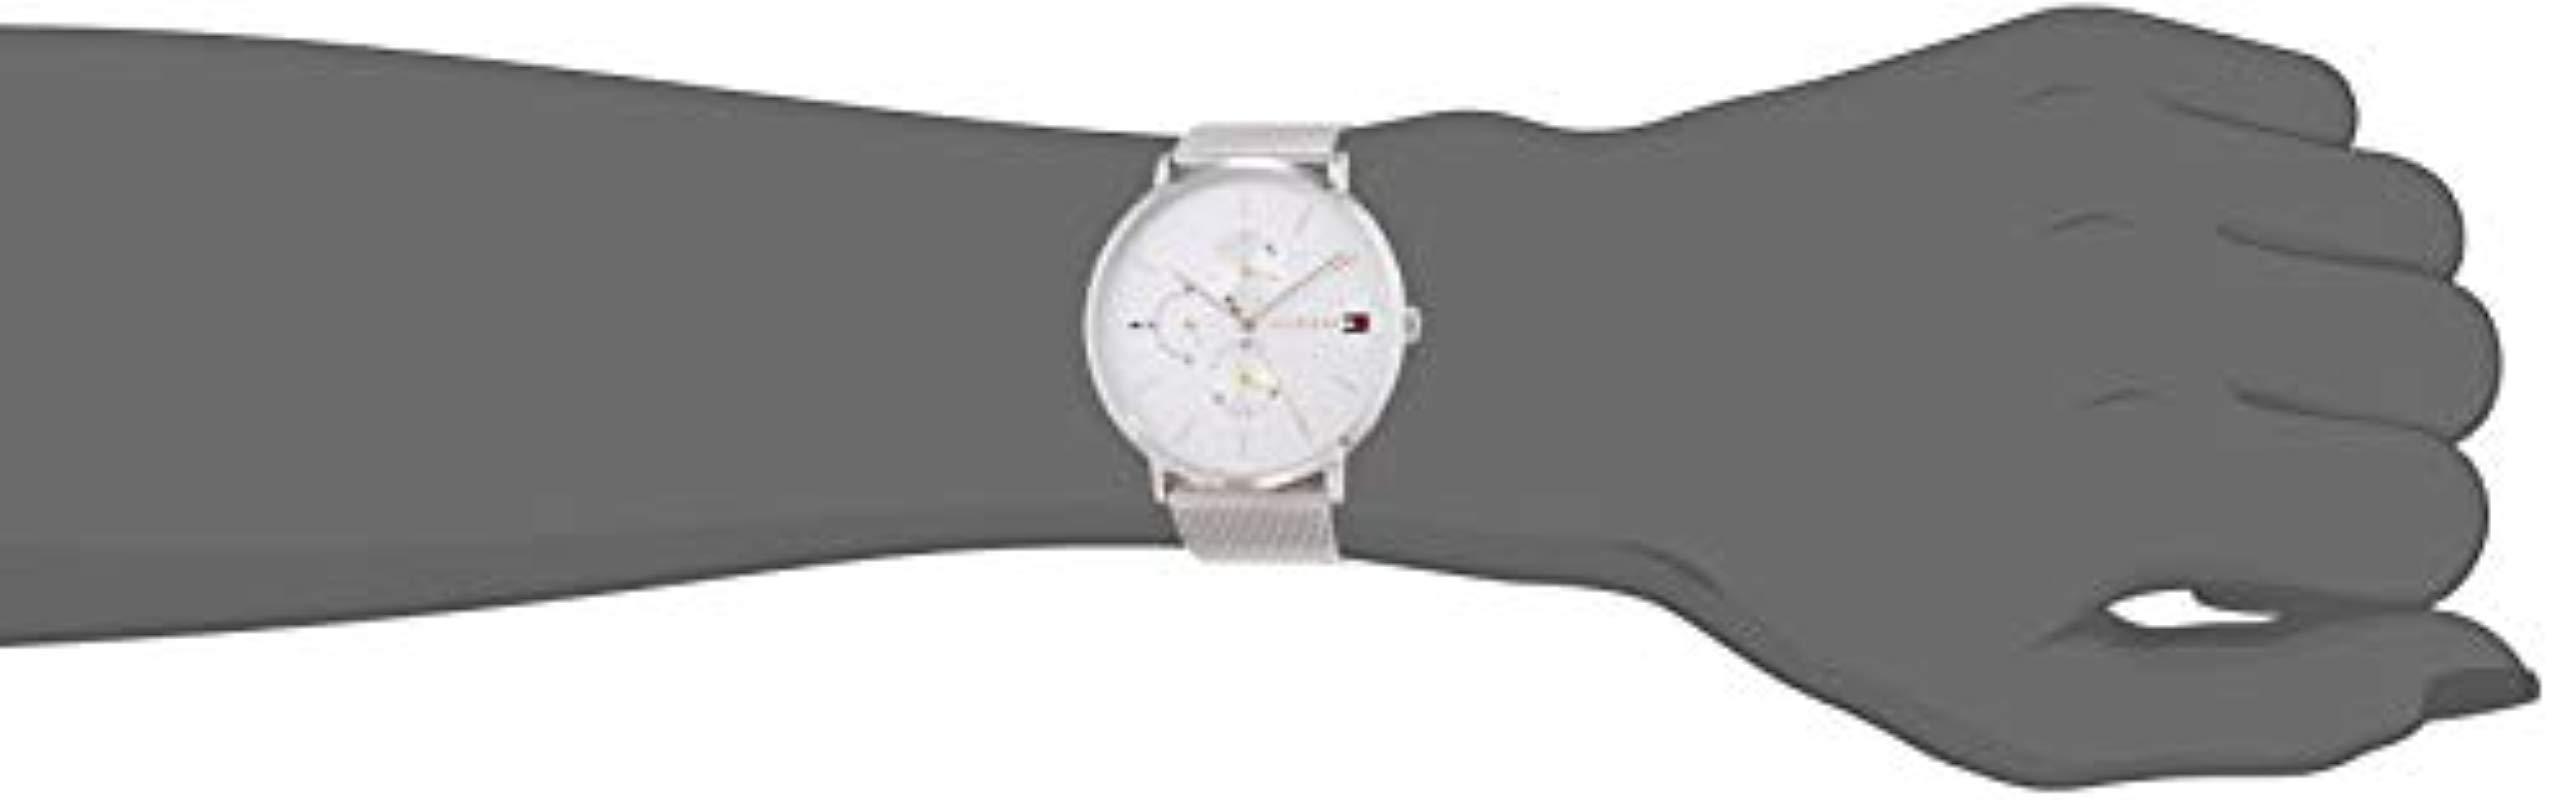 Tommy Hilfiger S Multi Dial Quartz Watch With Stainless Steel Strap 1781945  - Lyst